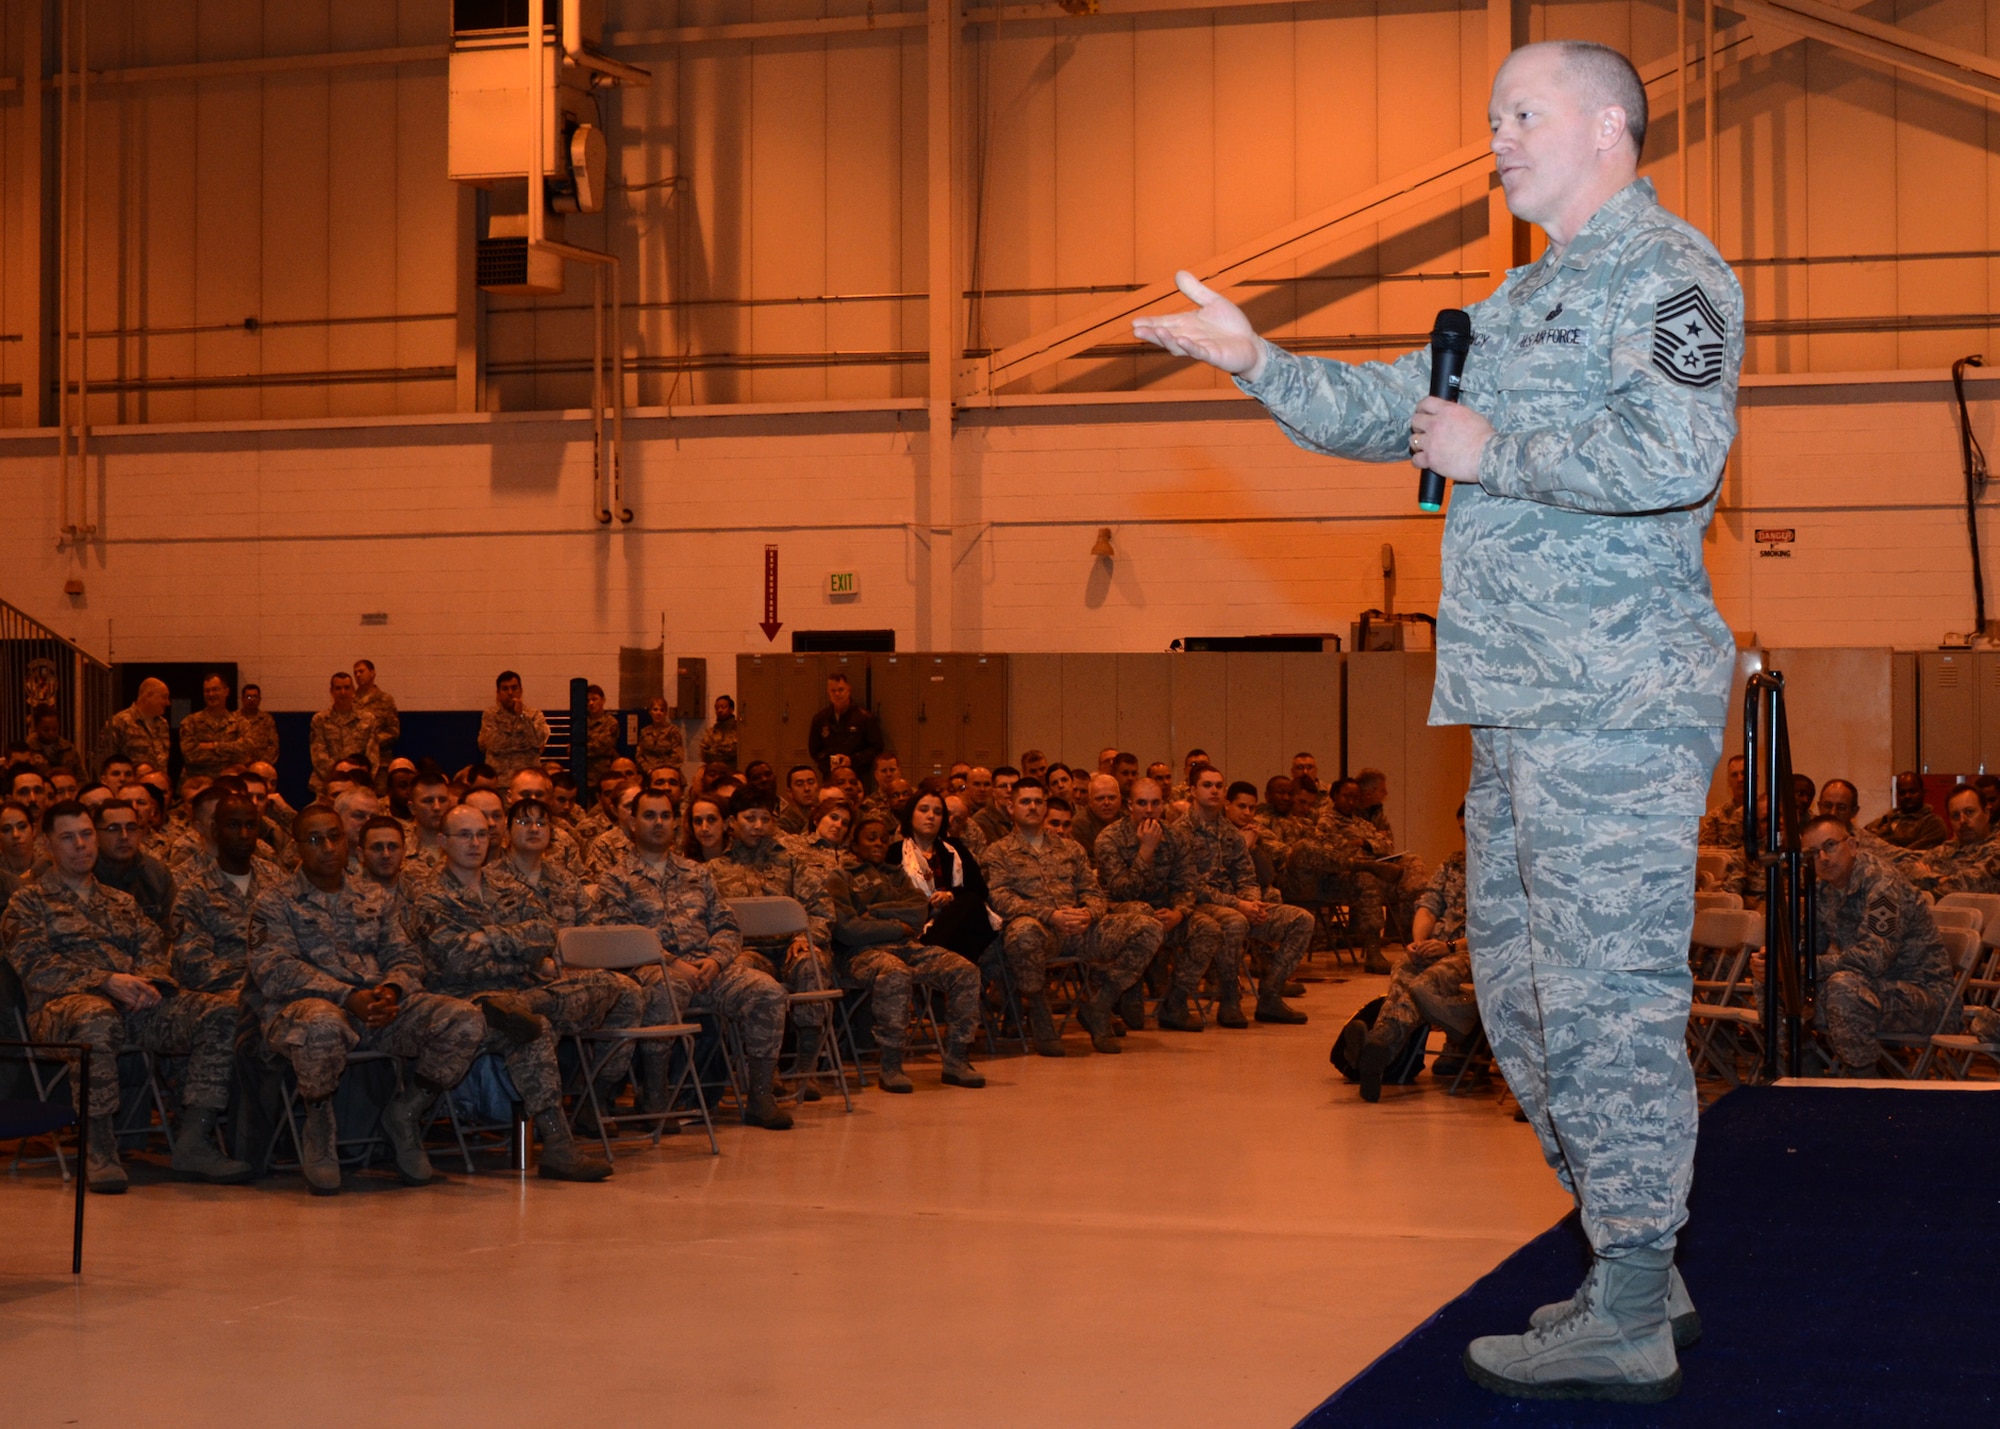 U.S. Air Force Chief Master Sergeant Christopher E. Muncy, Command Chief Master Sergeant of the Air National Guard speaks with members of the 175th Wing, Maryland Air National Guard during a town hall meeting on December 3, 2011 at Warfield Air National Guard Base, Baltimore, MD.  Muncy represents the highest level of enlisted leadership for the Air National Guard and is responsible for the interest regarding welfare, readiness, morale, proper utilization and progress concerning the enlisted personnel under his command. (National Guard Photo By Staff Sgt. Benjamin Hughes/RELEASED)